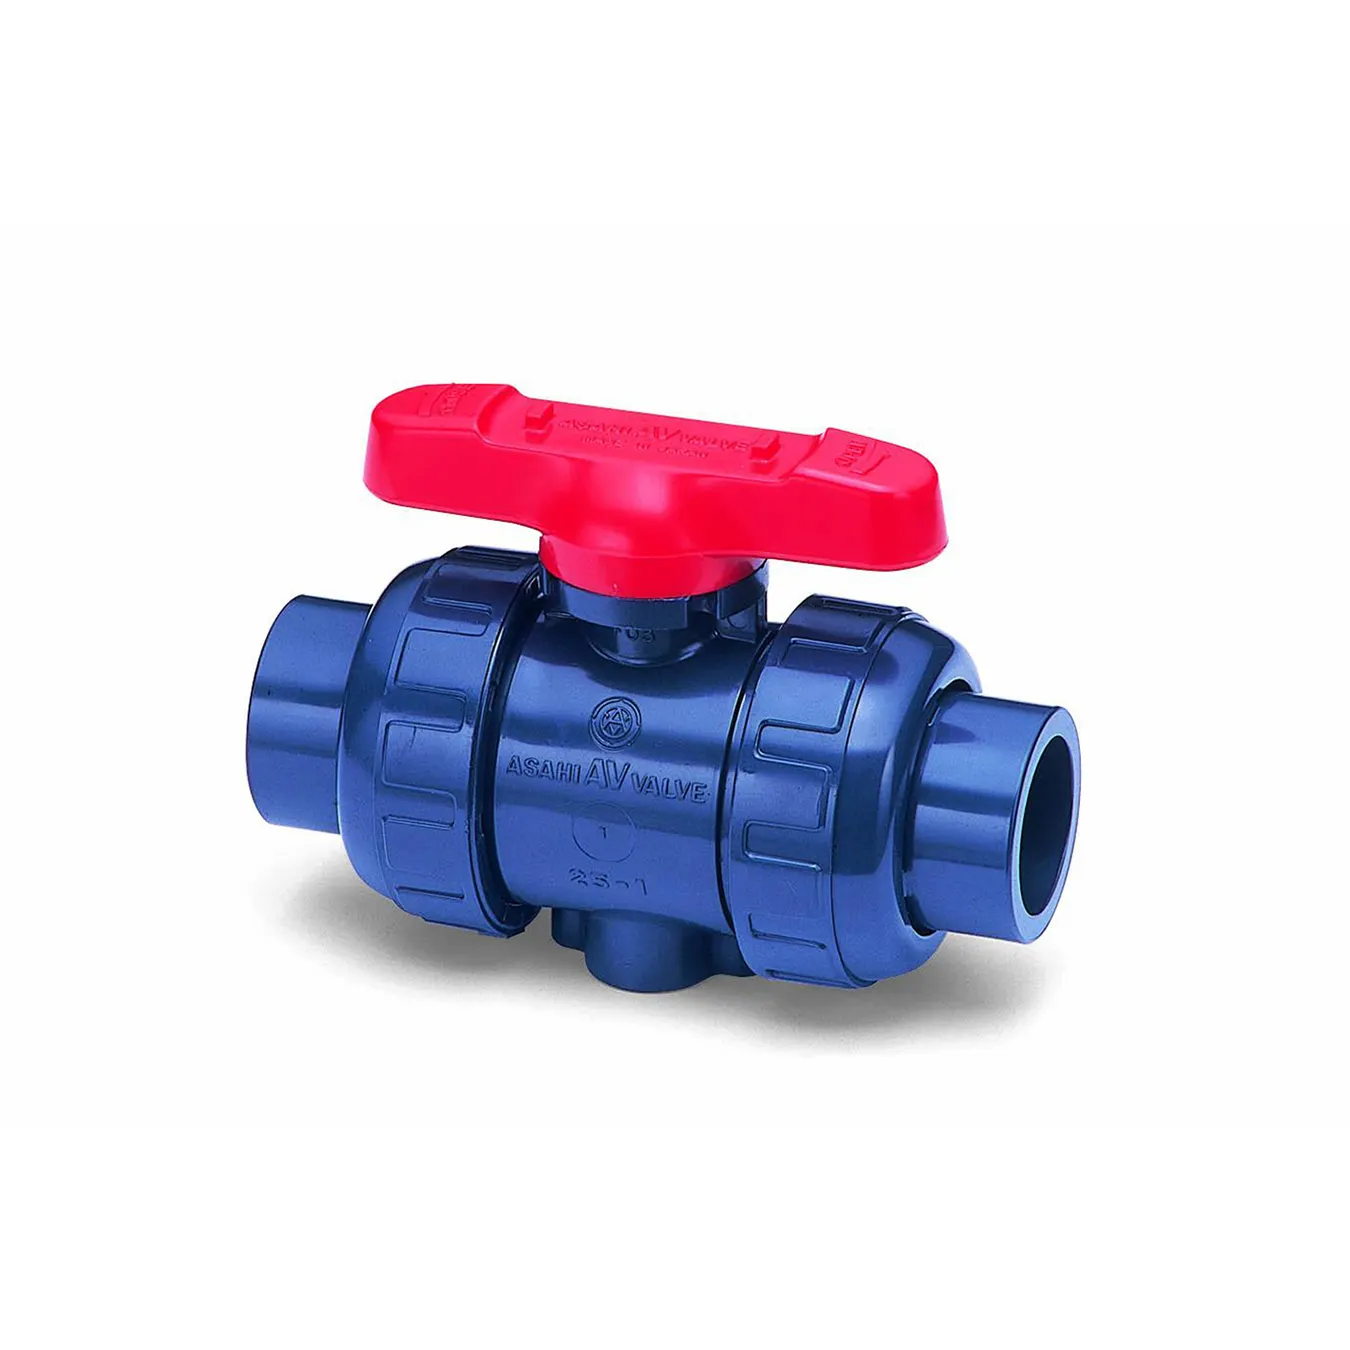 Simple installation on panel piping valves pipes pvc fittings pipe